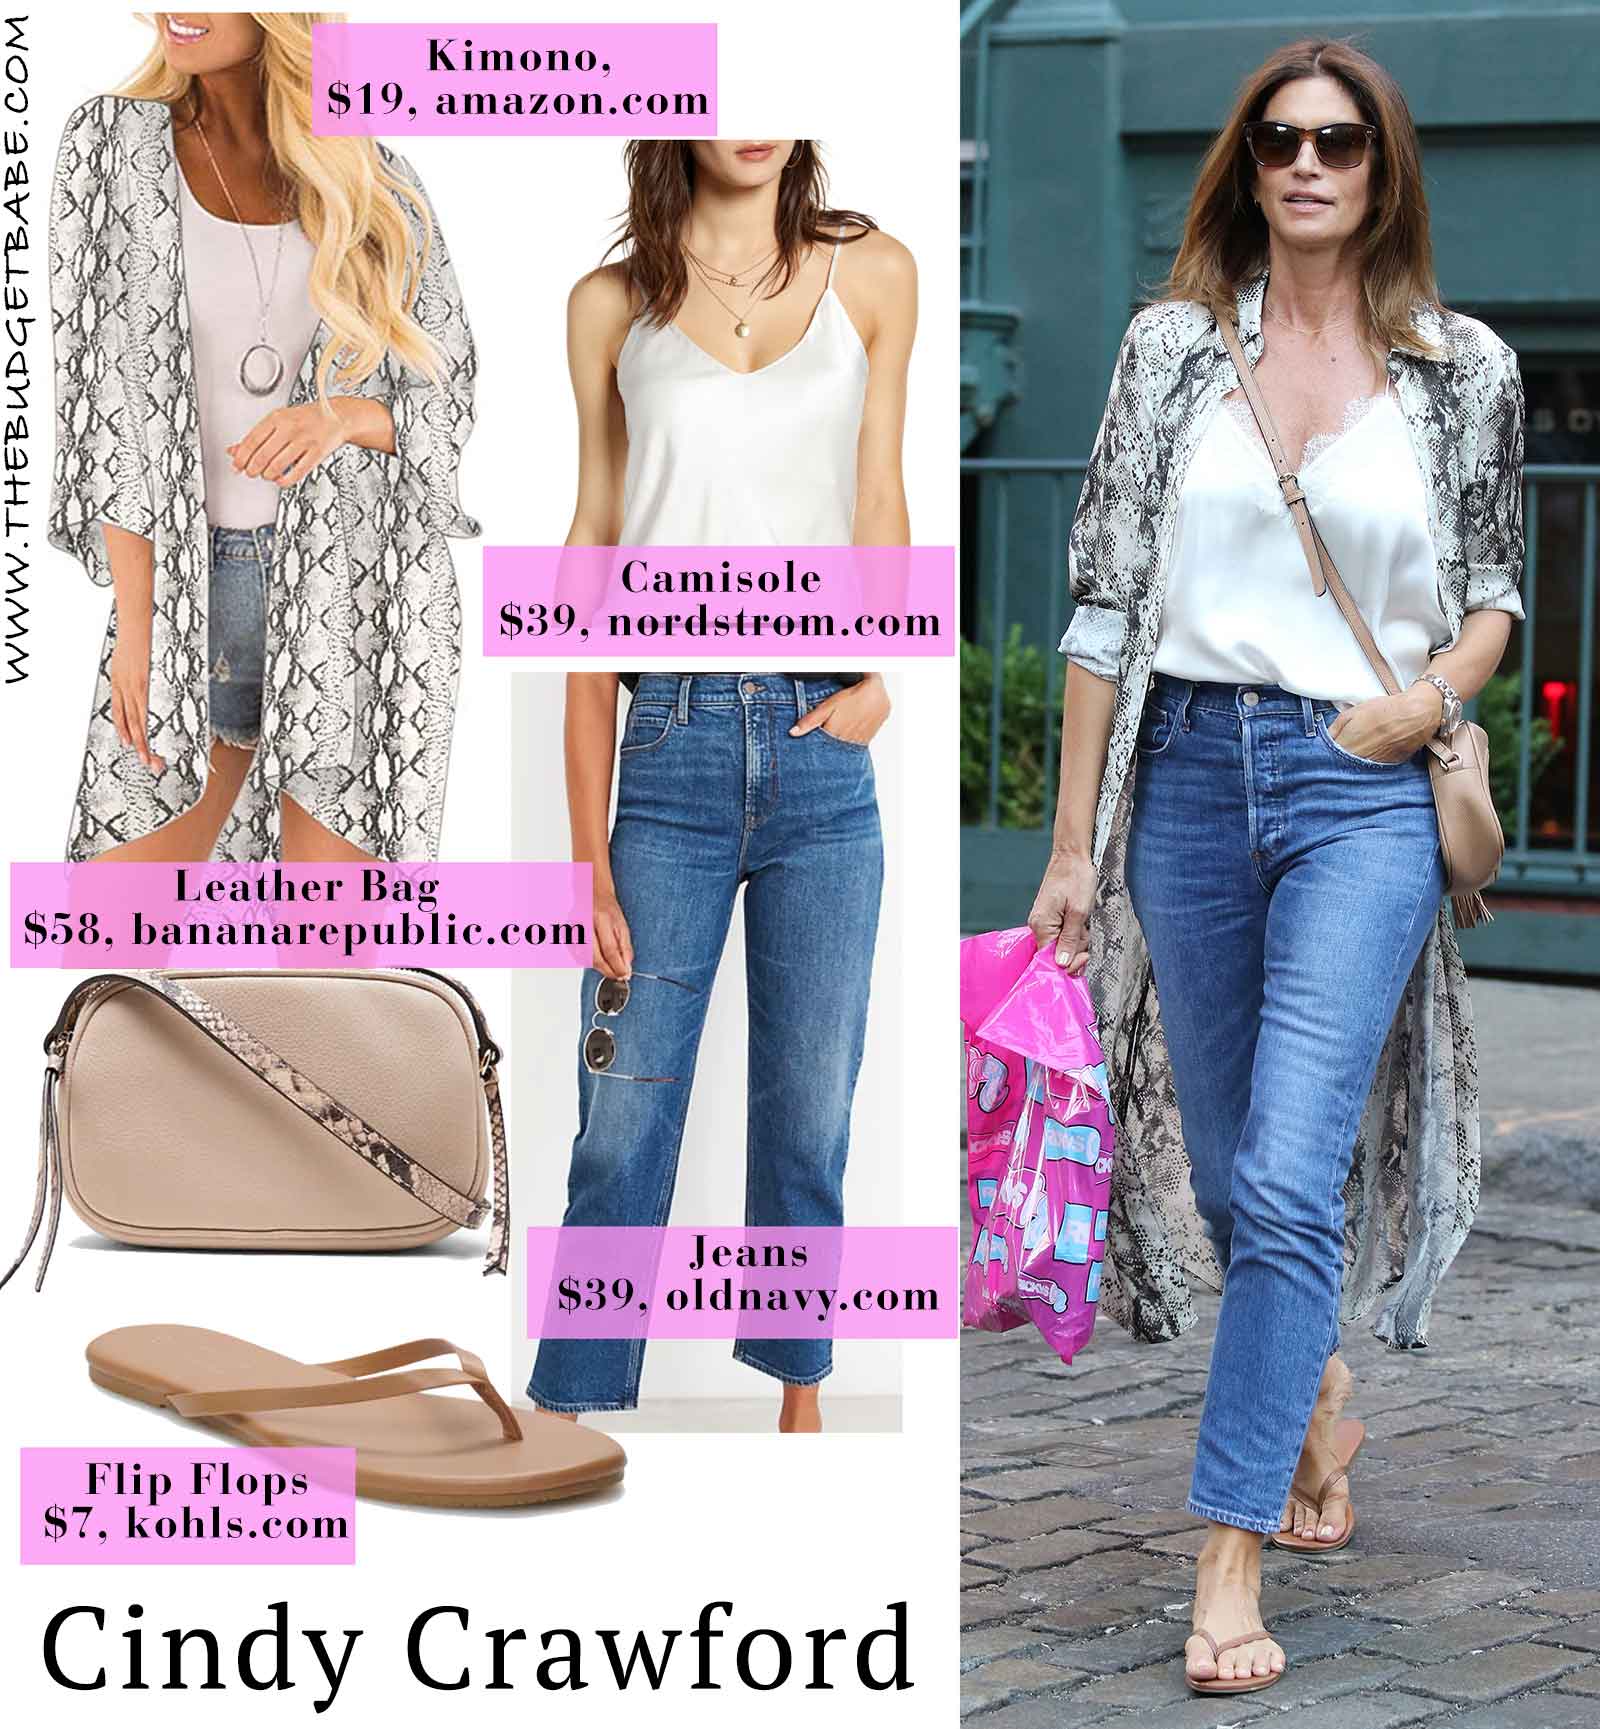 Cindy Crawford casual fashion style - snakeskin duster and jeans